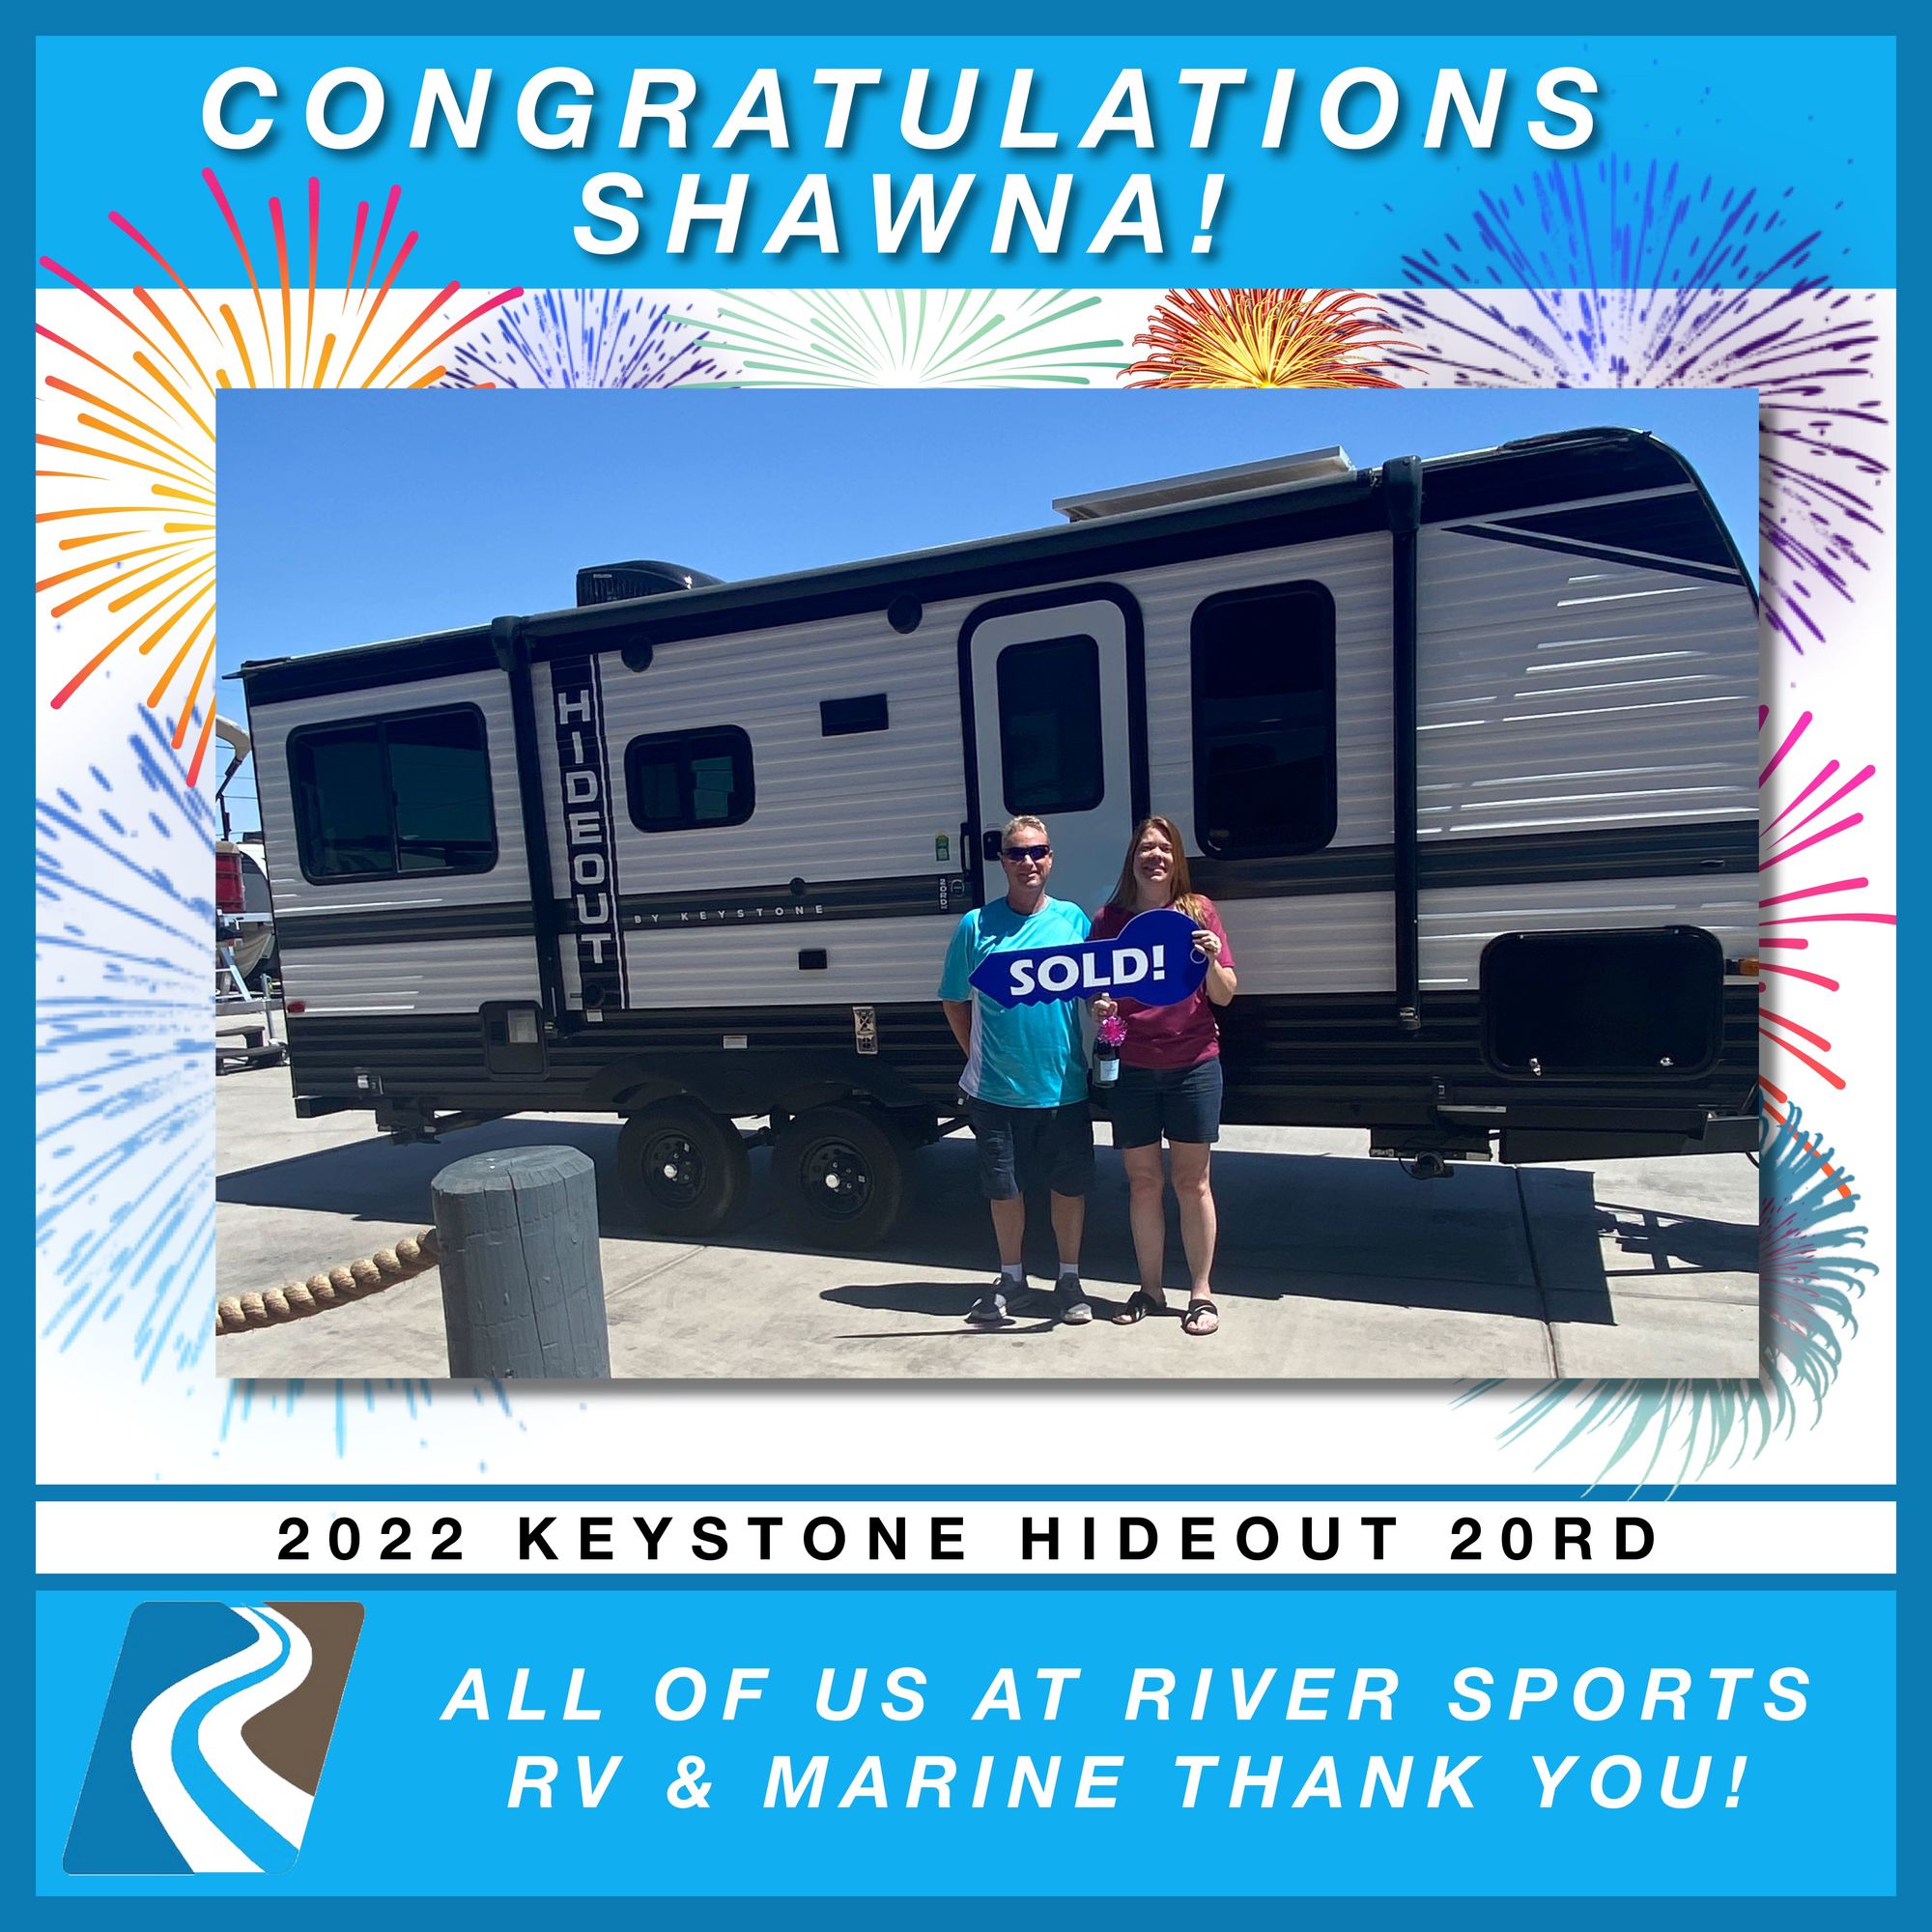 Shawna with her new Keystone Hideout 20RD from River Sports RV and Marine